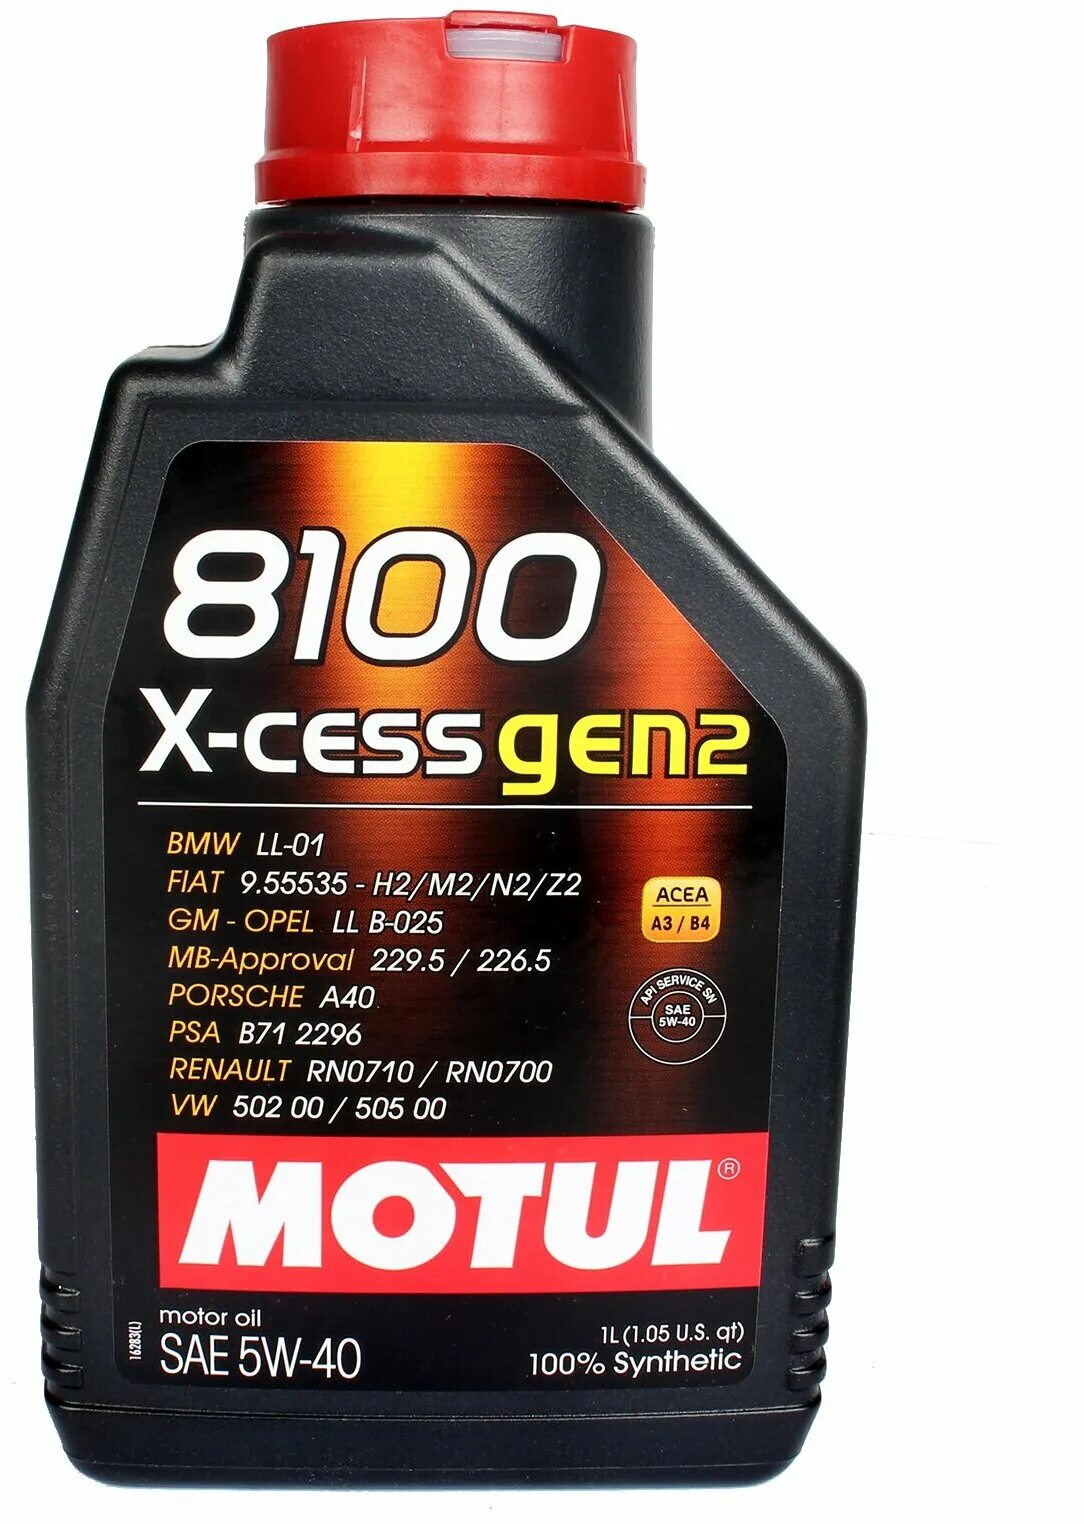 Motul 5w40 8100 x Cess gen2 5л. 8100 X-Cess gen2 5w40 1 Motul. Мотюль 5w40 8100 x-Cess gen2. Motul 8100 x-clean gen2 5w30. Моторное масло 8100 5w40